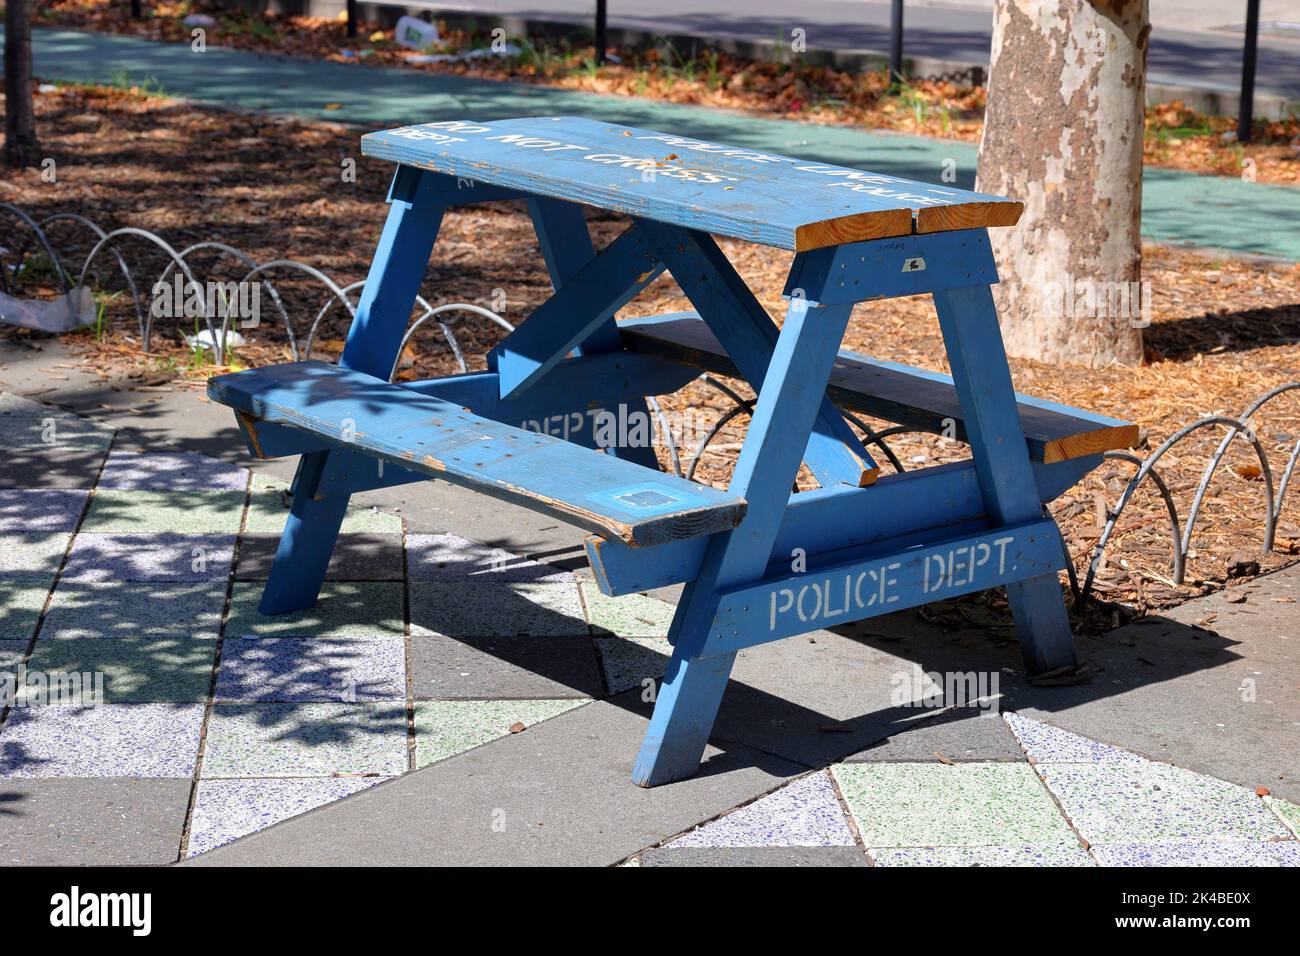 A NYPD police barricade upcycled for use as a picnic table; a functional piece of furniture and art piece left at a park in Manhattan, New York Stock Photo